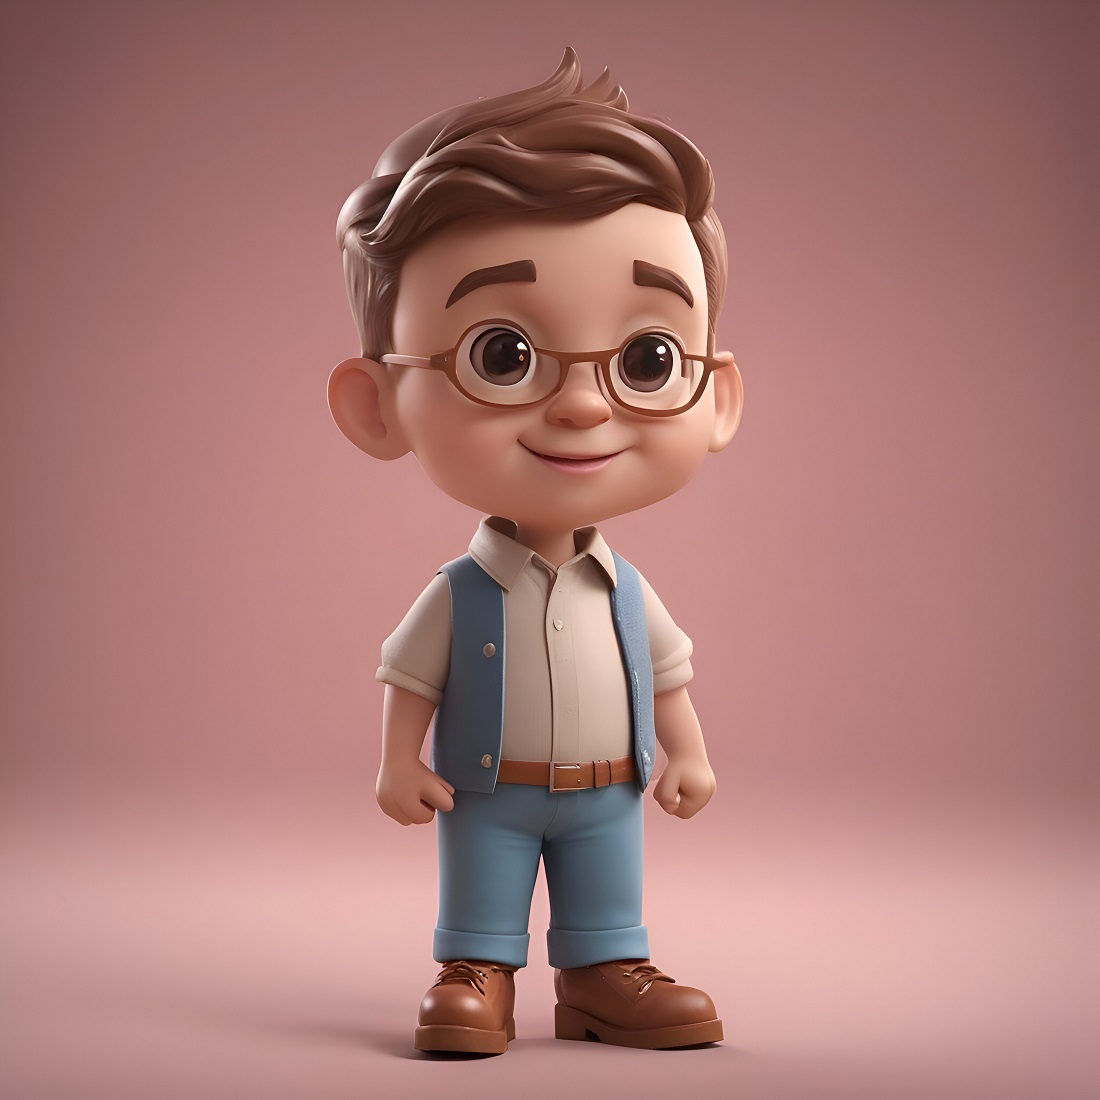 3d illustration cute cartoon boy with glasses preview image.